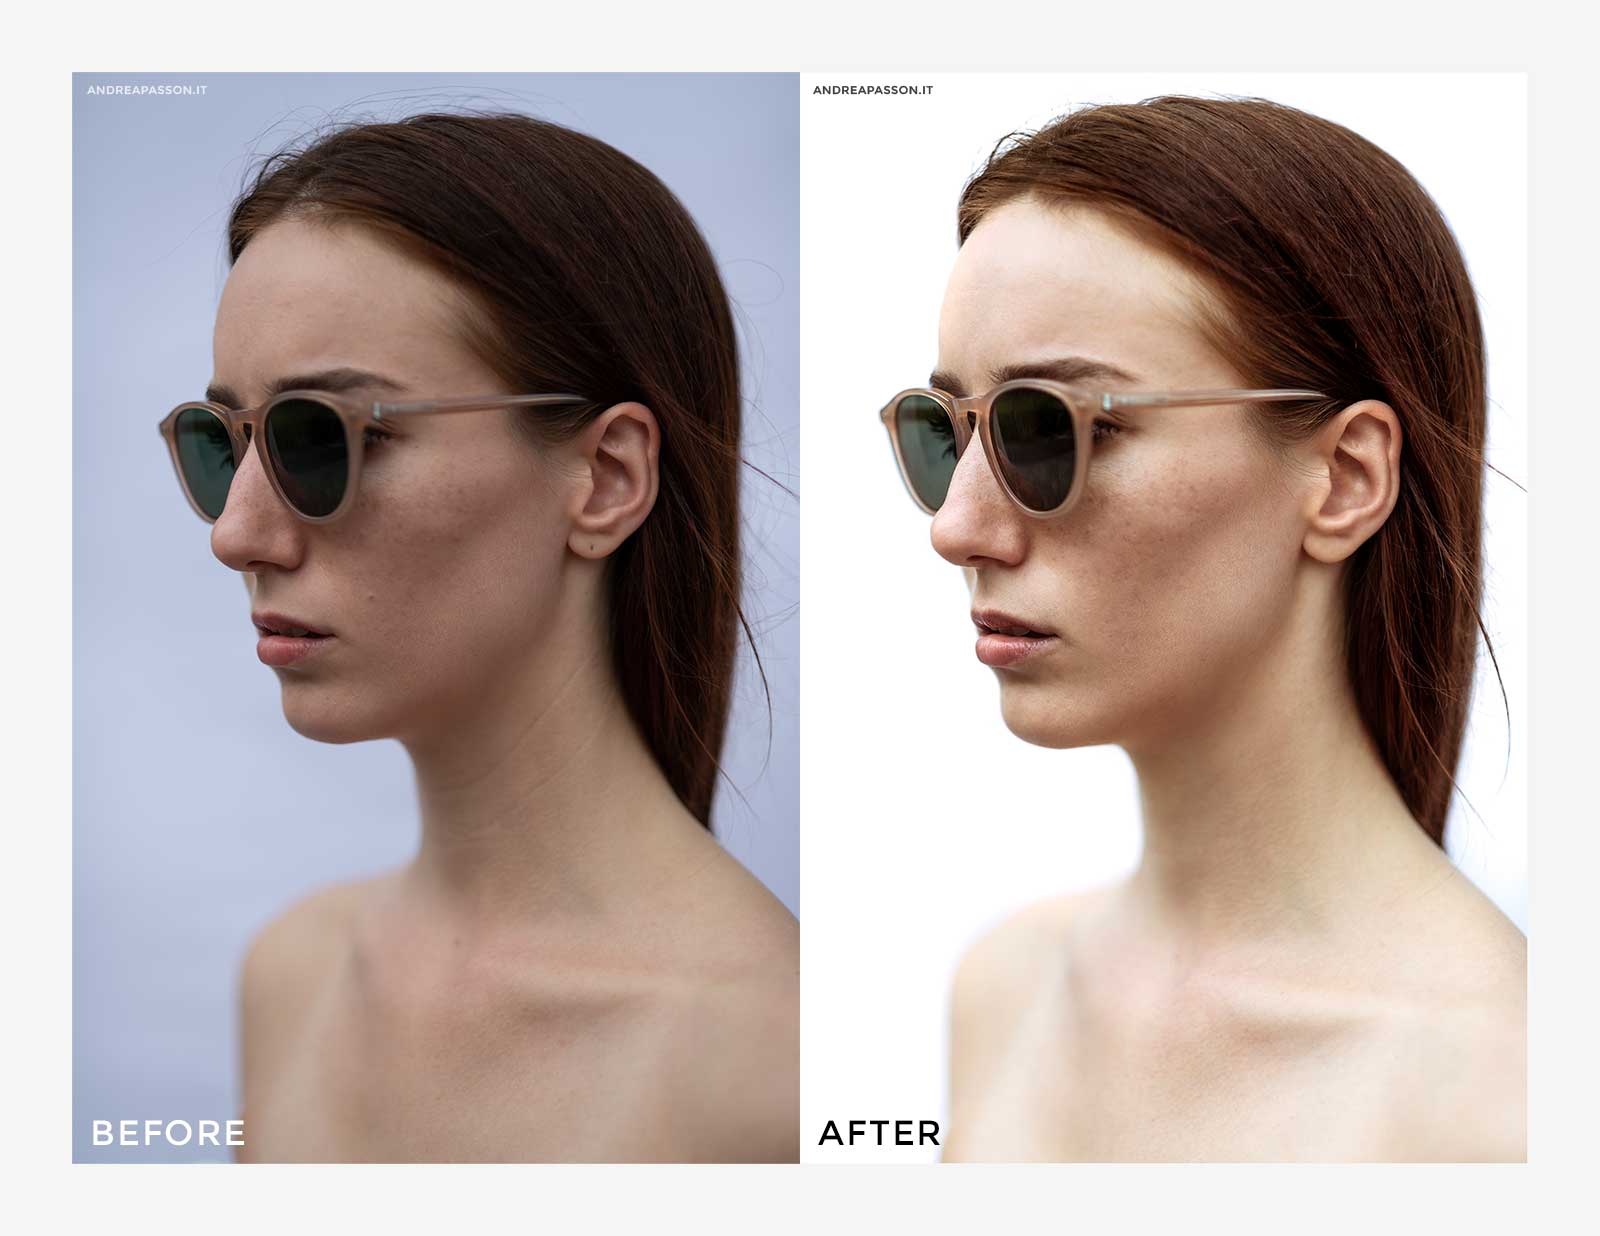 Before & After - Post Produzione Fotografica Professionale a Treviso - Eyewear Fashion